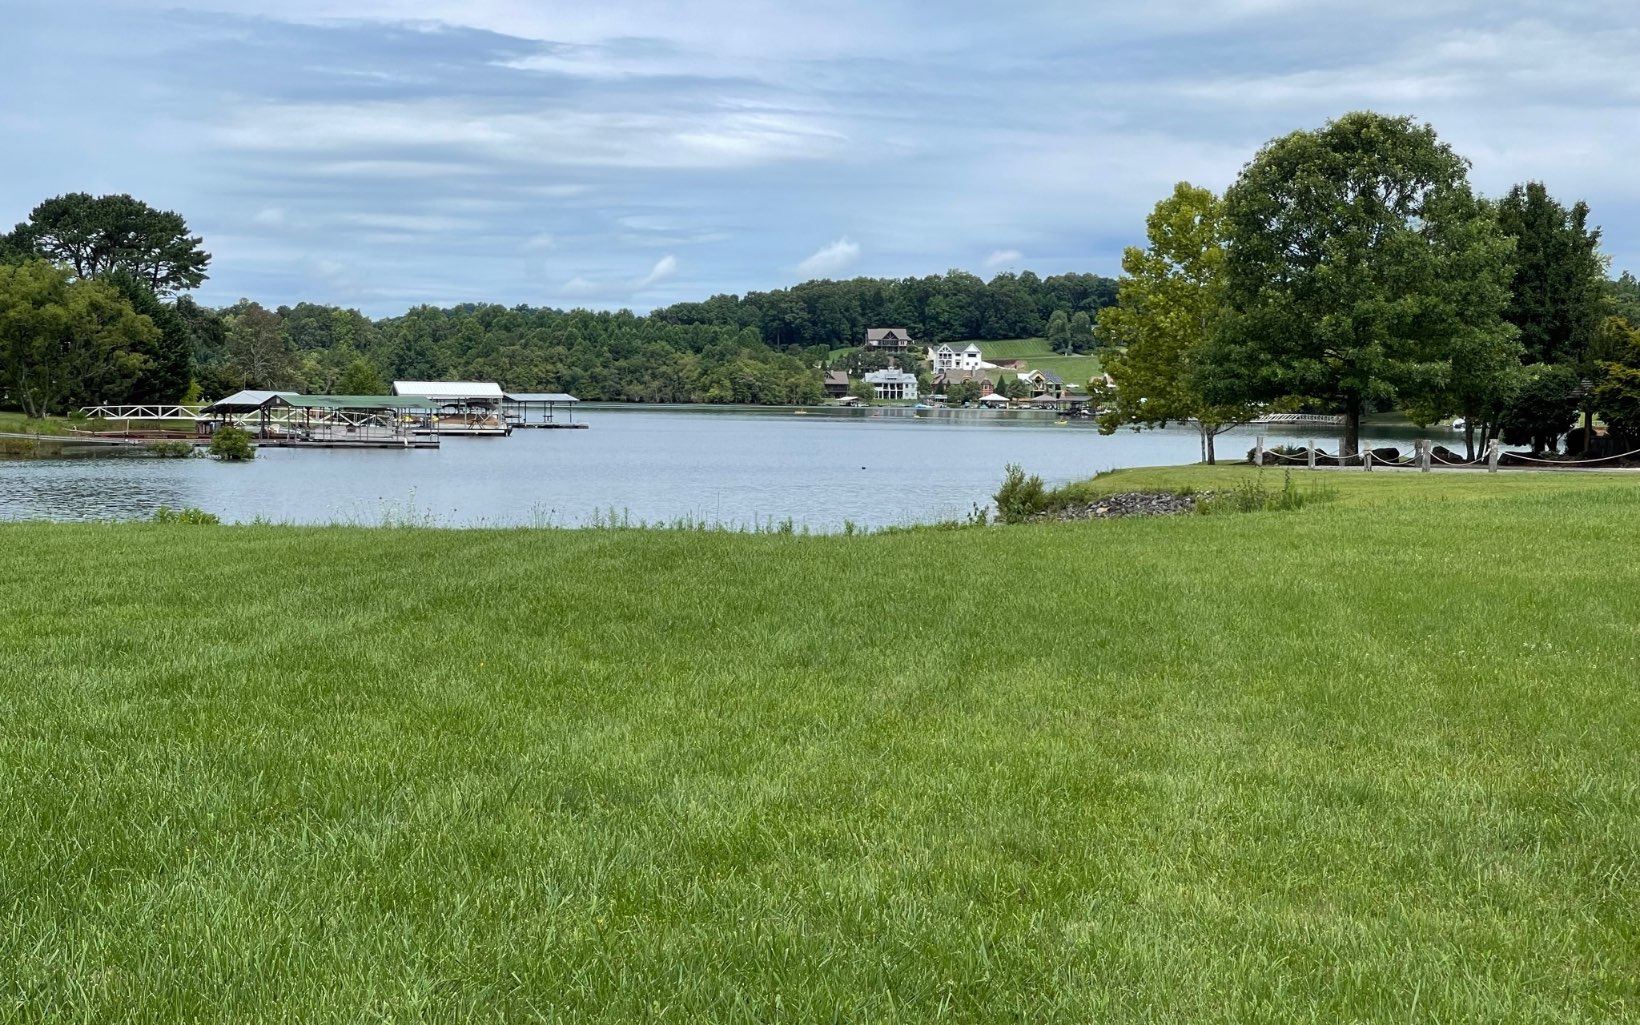 Lakefront Lot in Bell Creek Cove Subdivision, Deeded Boat slip at community Dock. Common area includes boat ramp, Covered Fireplace area with tables, this lot is gentle and easy to build on, close to community dock, one lot away. Easy drive to Hiawassee and located on a beautiful part of Lake Chatuge.